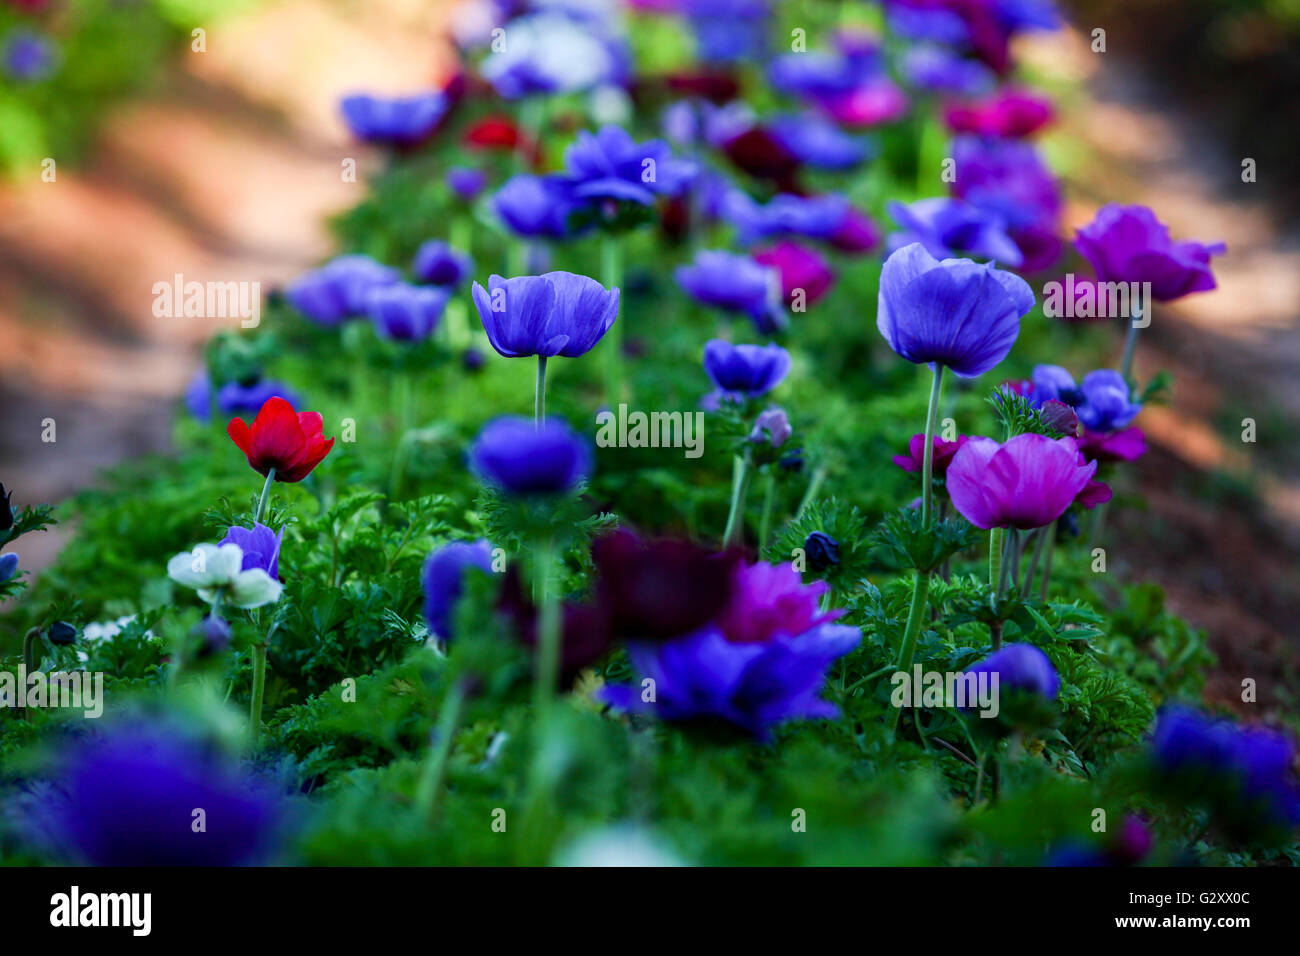 A field of cultivated colourful and vivid Anemone flowers. Photographed in Israel Stock Photo